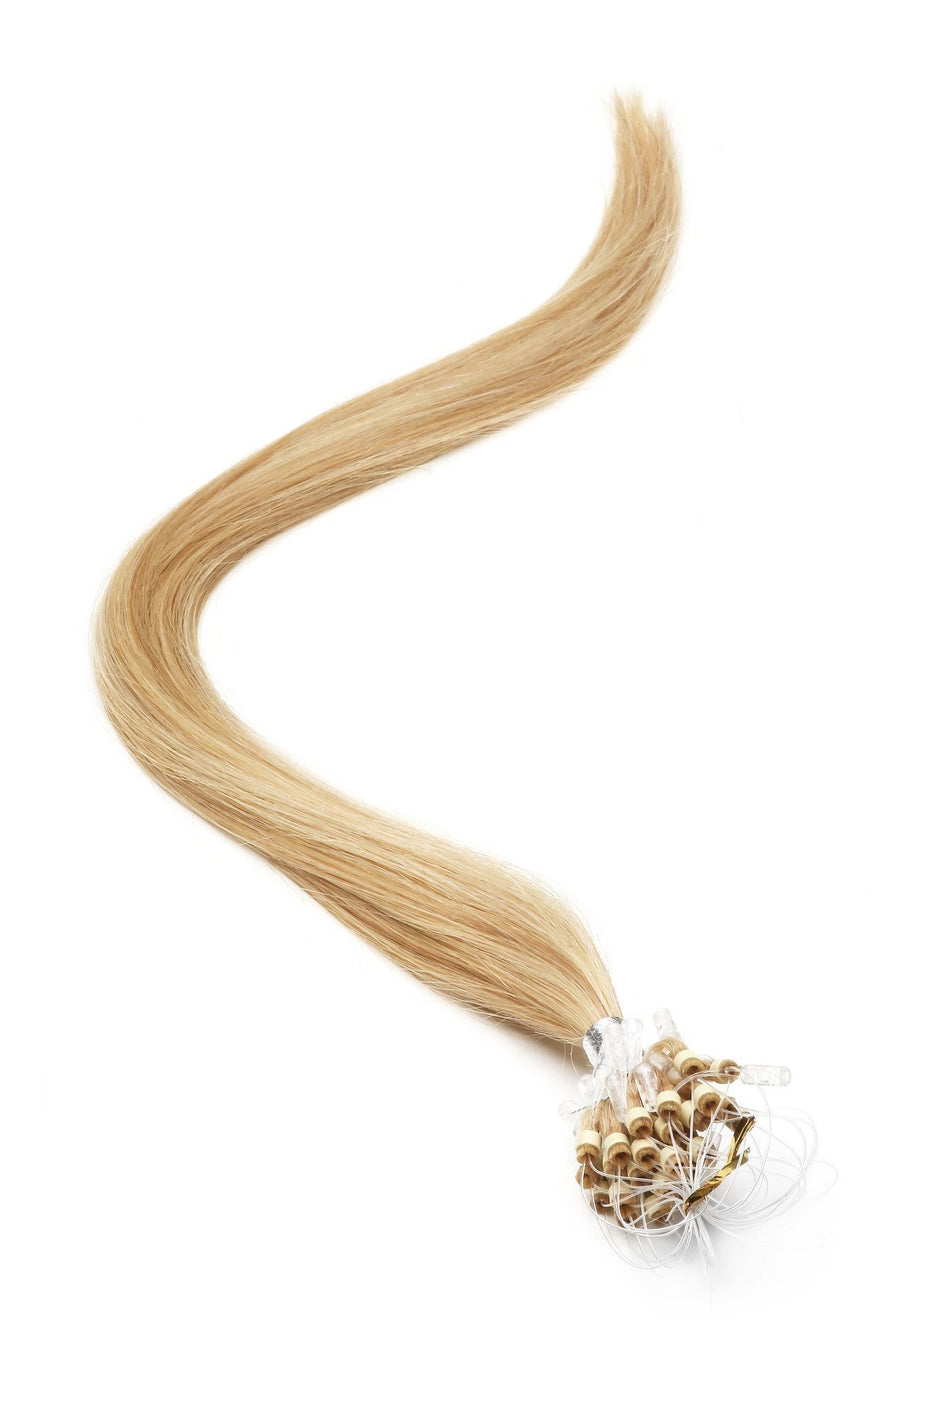 Micro Ring Hair Extensions | 18 inch | Blondest Bronze (22-27Mix) - Beauty Hair Products LtdHair Extensions